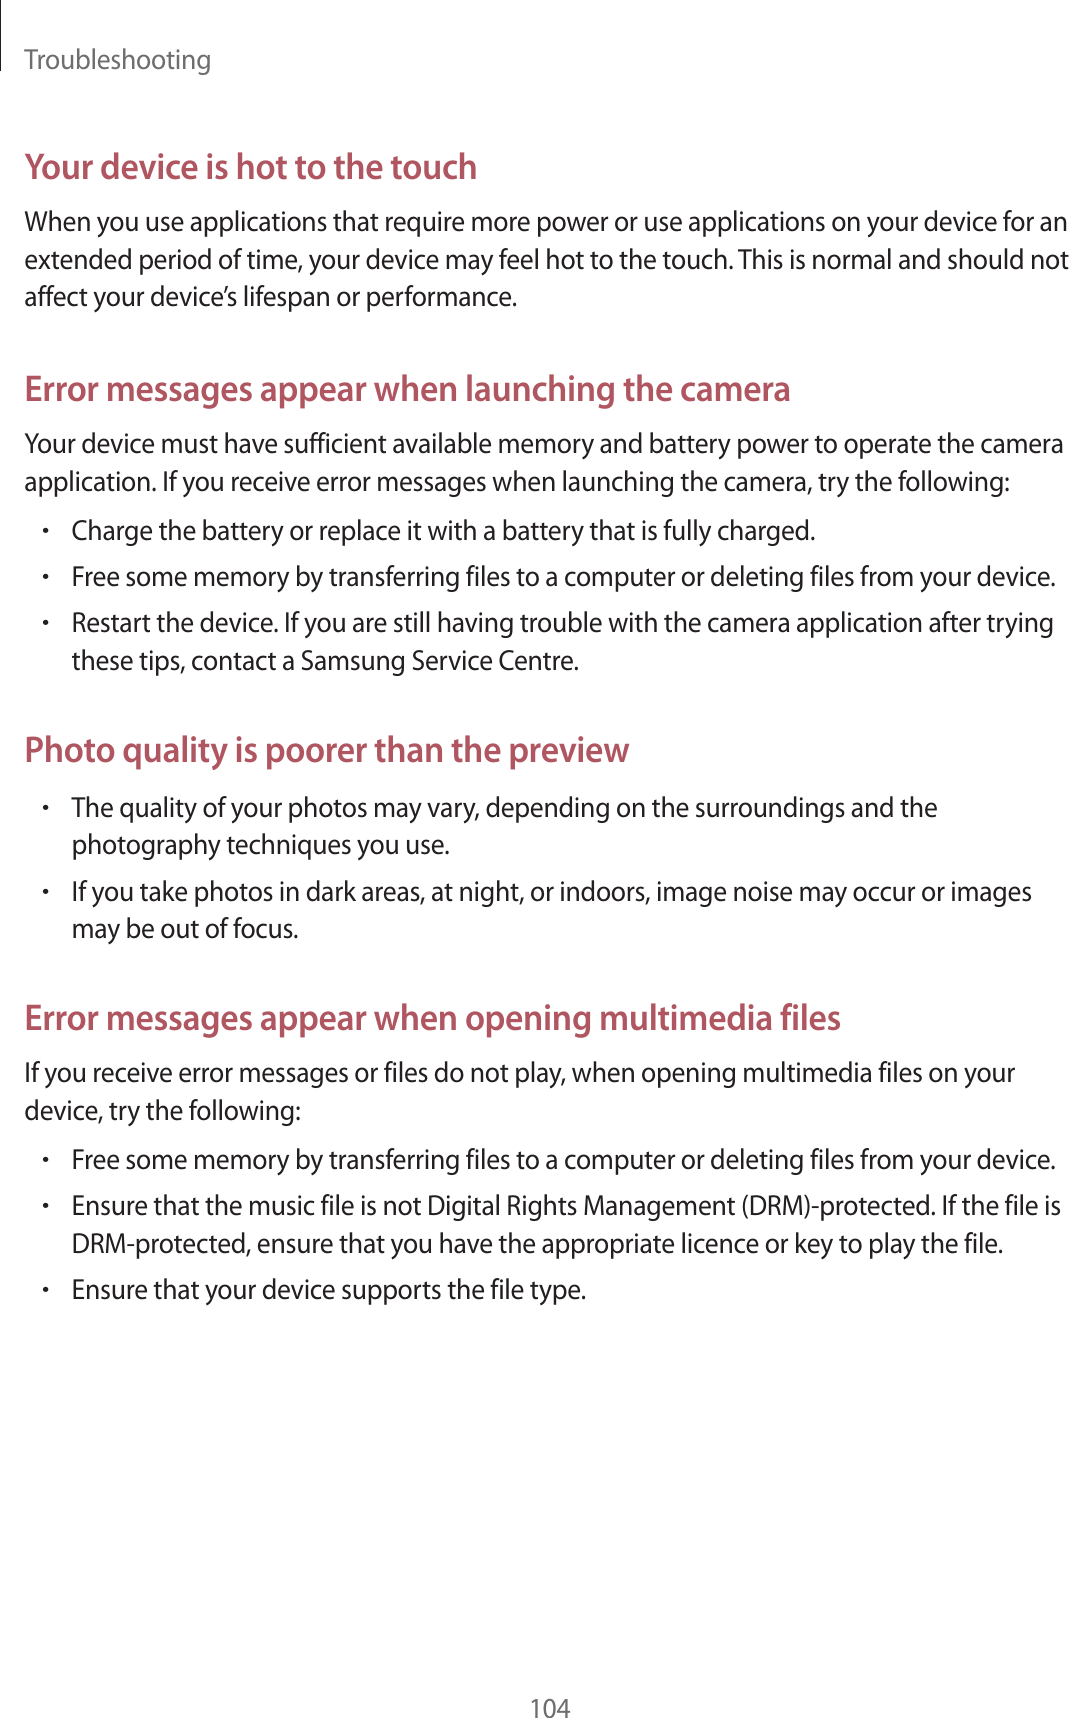 Troubleshooting104Your device is hot to the touchWhen you use applications that require more power or use applications on your device for an extended period of time, your device may feel hot to the touch. This is normal and should not affect your device’s lifespan or performance.Error messages appear when launching the cameraYour device must have sufficient available memory and battery power to operate the camera application. If you receive error messages when launching the camera, try the following:rCharge the battery or replace it with a battery that is fully charged.rFree some memory by transferring files to a computer or deleting files from your device.rRestart the device. If you are still having trouble with the camera application after trying these tips, contact a Samsung Service Centre.Photo quality is poorer than the previewrThe quality of your photos may vary, depending on the surroundings and the photography techniques you use.rIf you take photos in dark areas, at night, or indoors, image noise may occur or images may be out of focus.Error messages appear when opening multimedia filesIf you receive error messages or files do not play, when opening multimedia files on your device, try the following:rFree some memory by transferring files to a computer or deleting files from your device.rEnsure that the music file is not Digital Rights Management (DRM)-protected. If the file is DRM-protected, ensure that you have the appropriate licence or key to play the file.rEnsure that your device supports the file type.